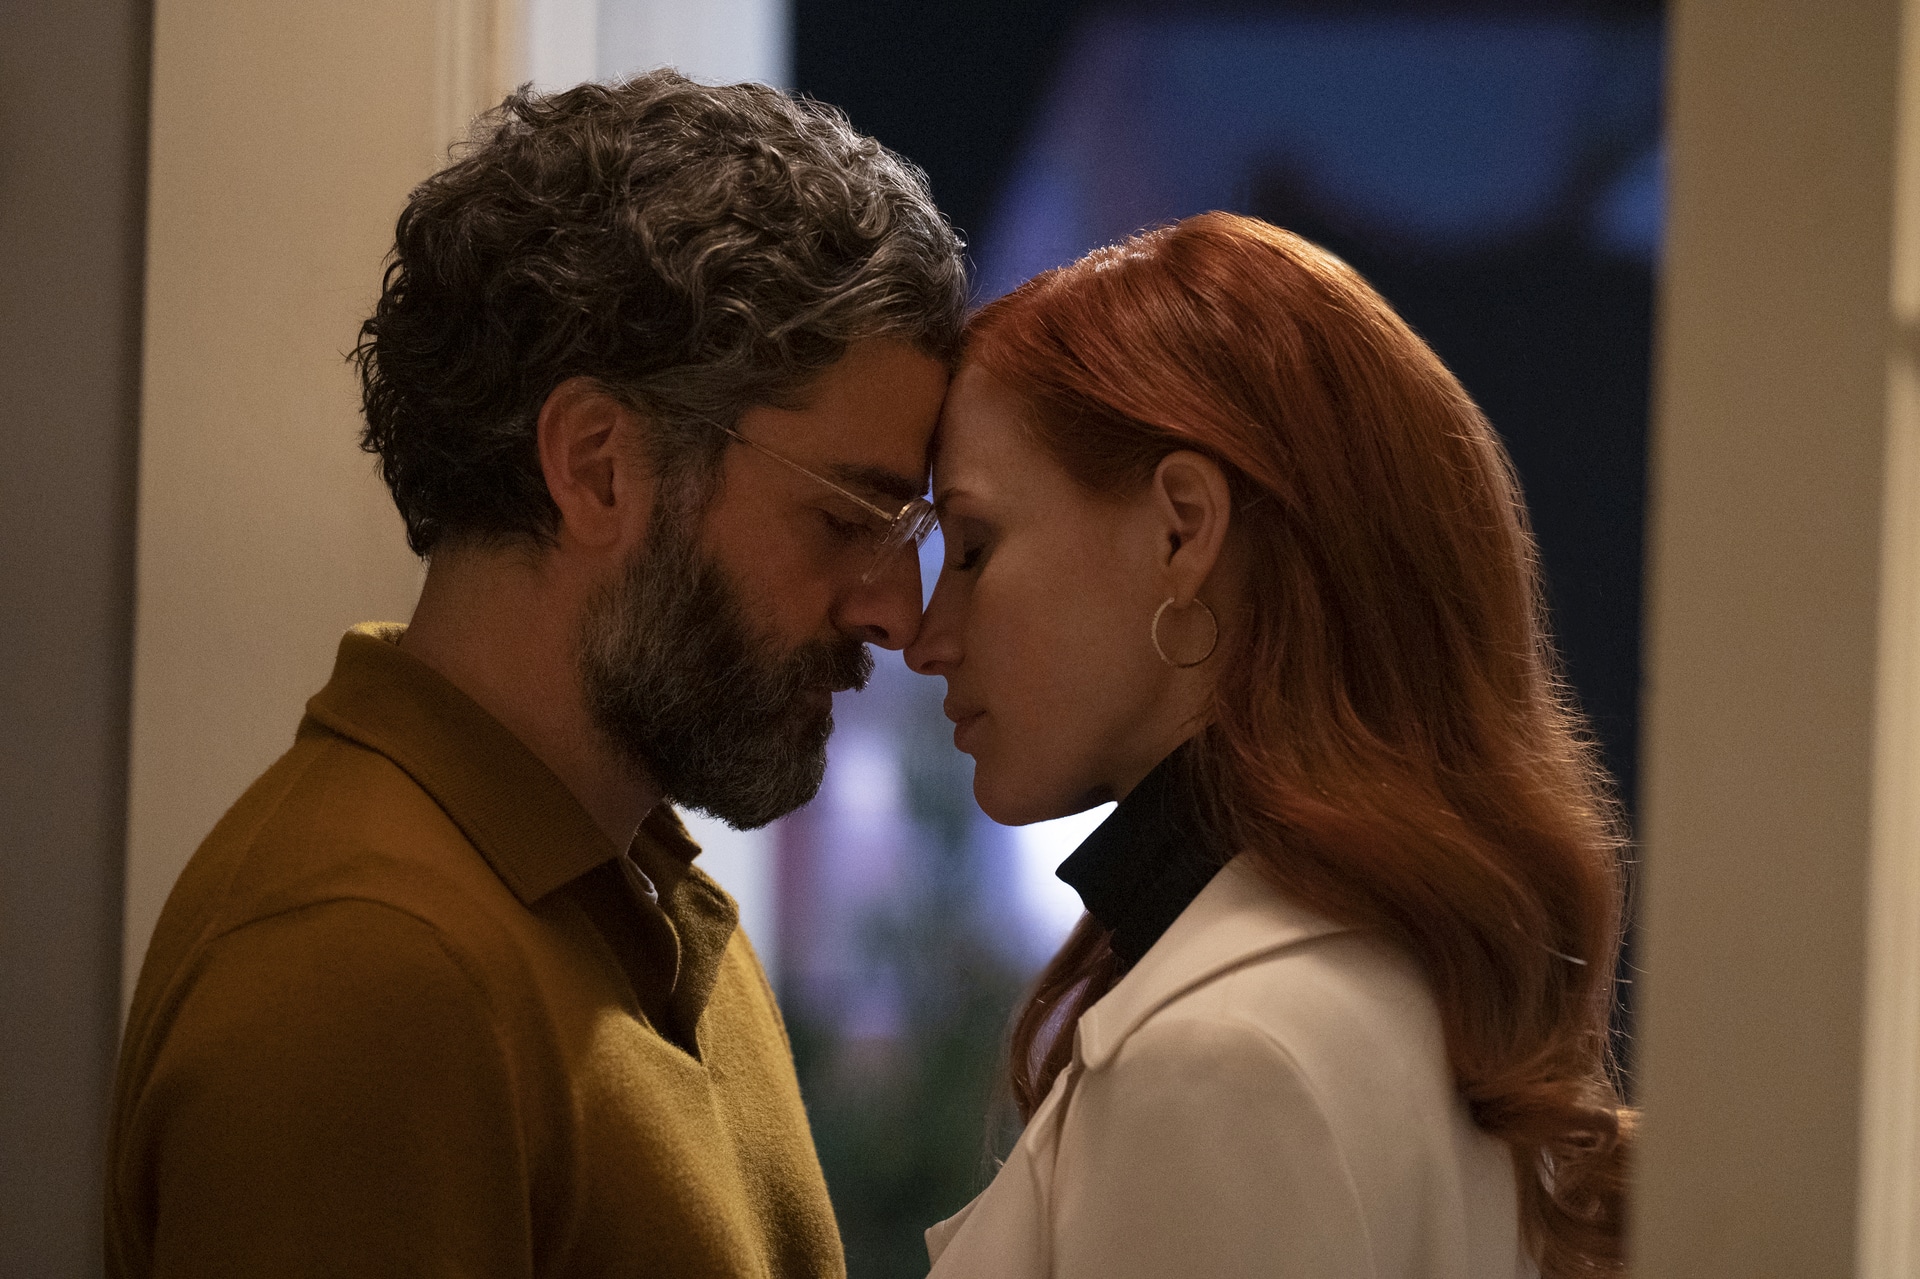 Oscar Isaac and Jessica Chastain in Scenes from a Marriage Episode 3